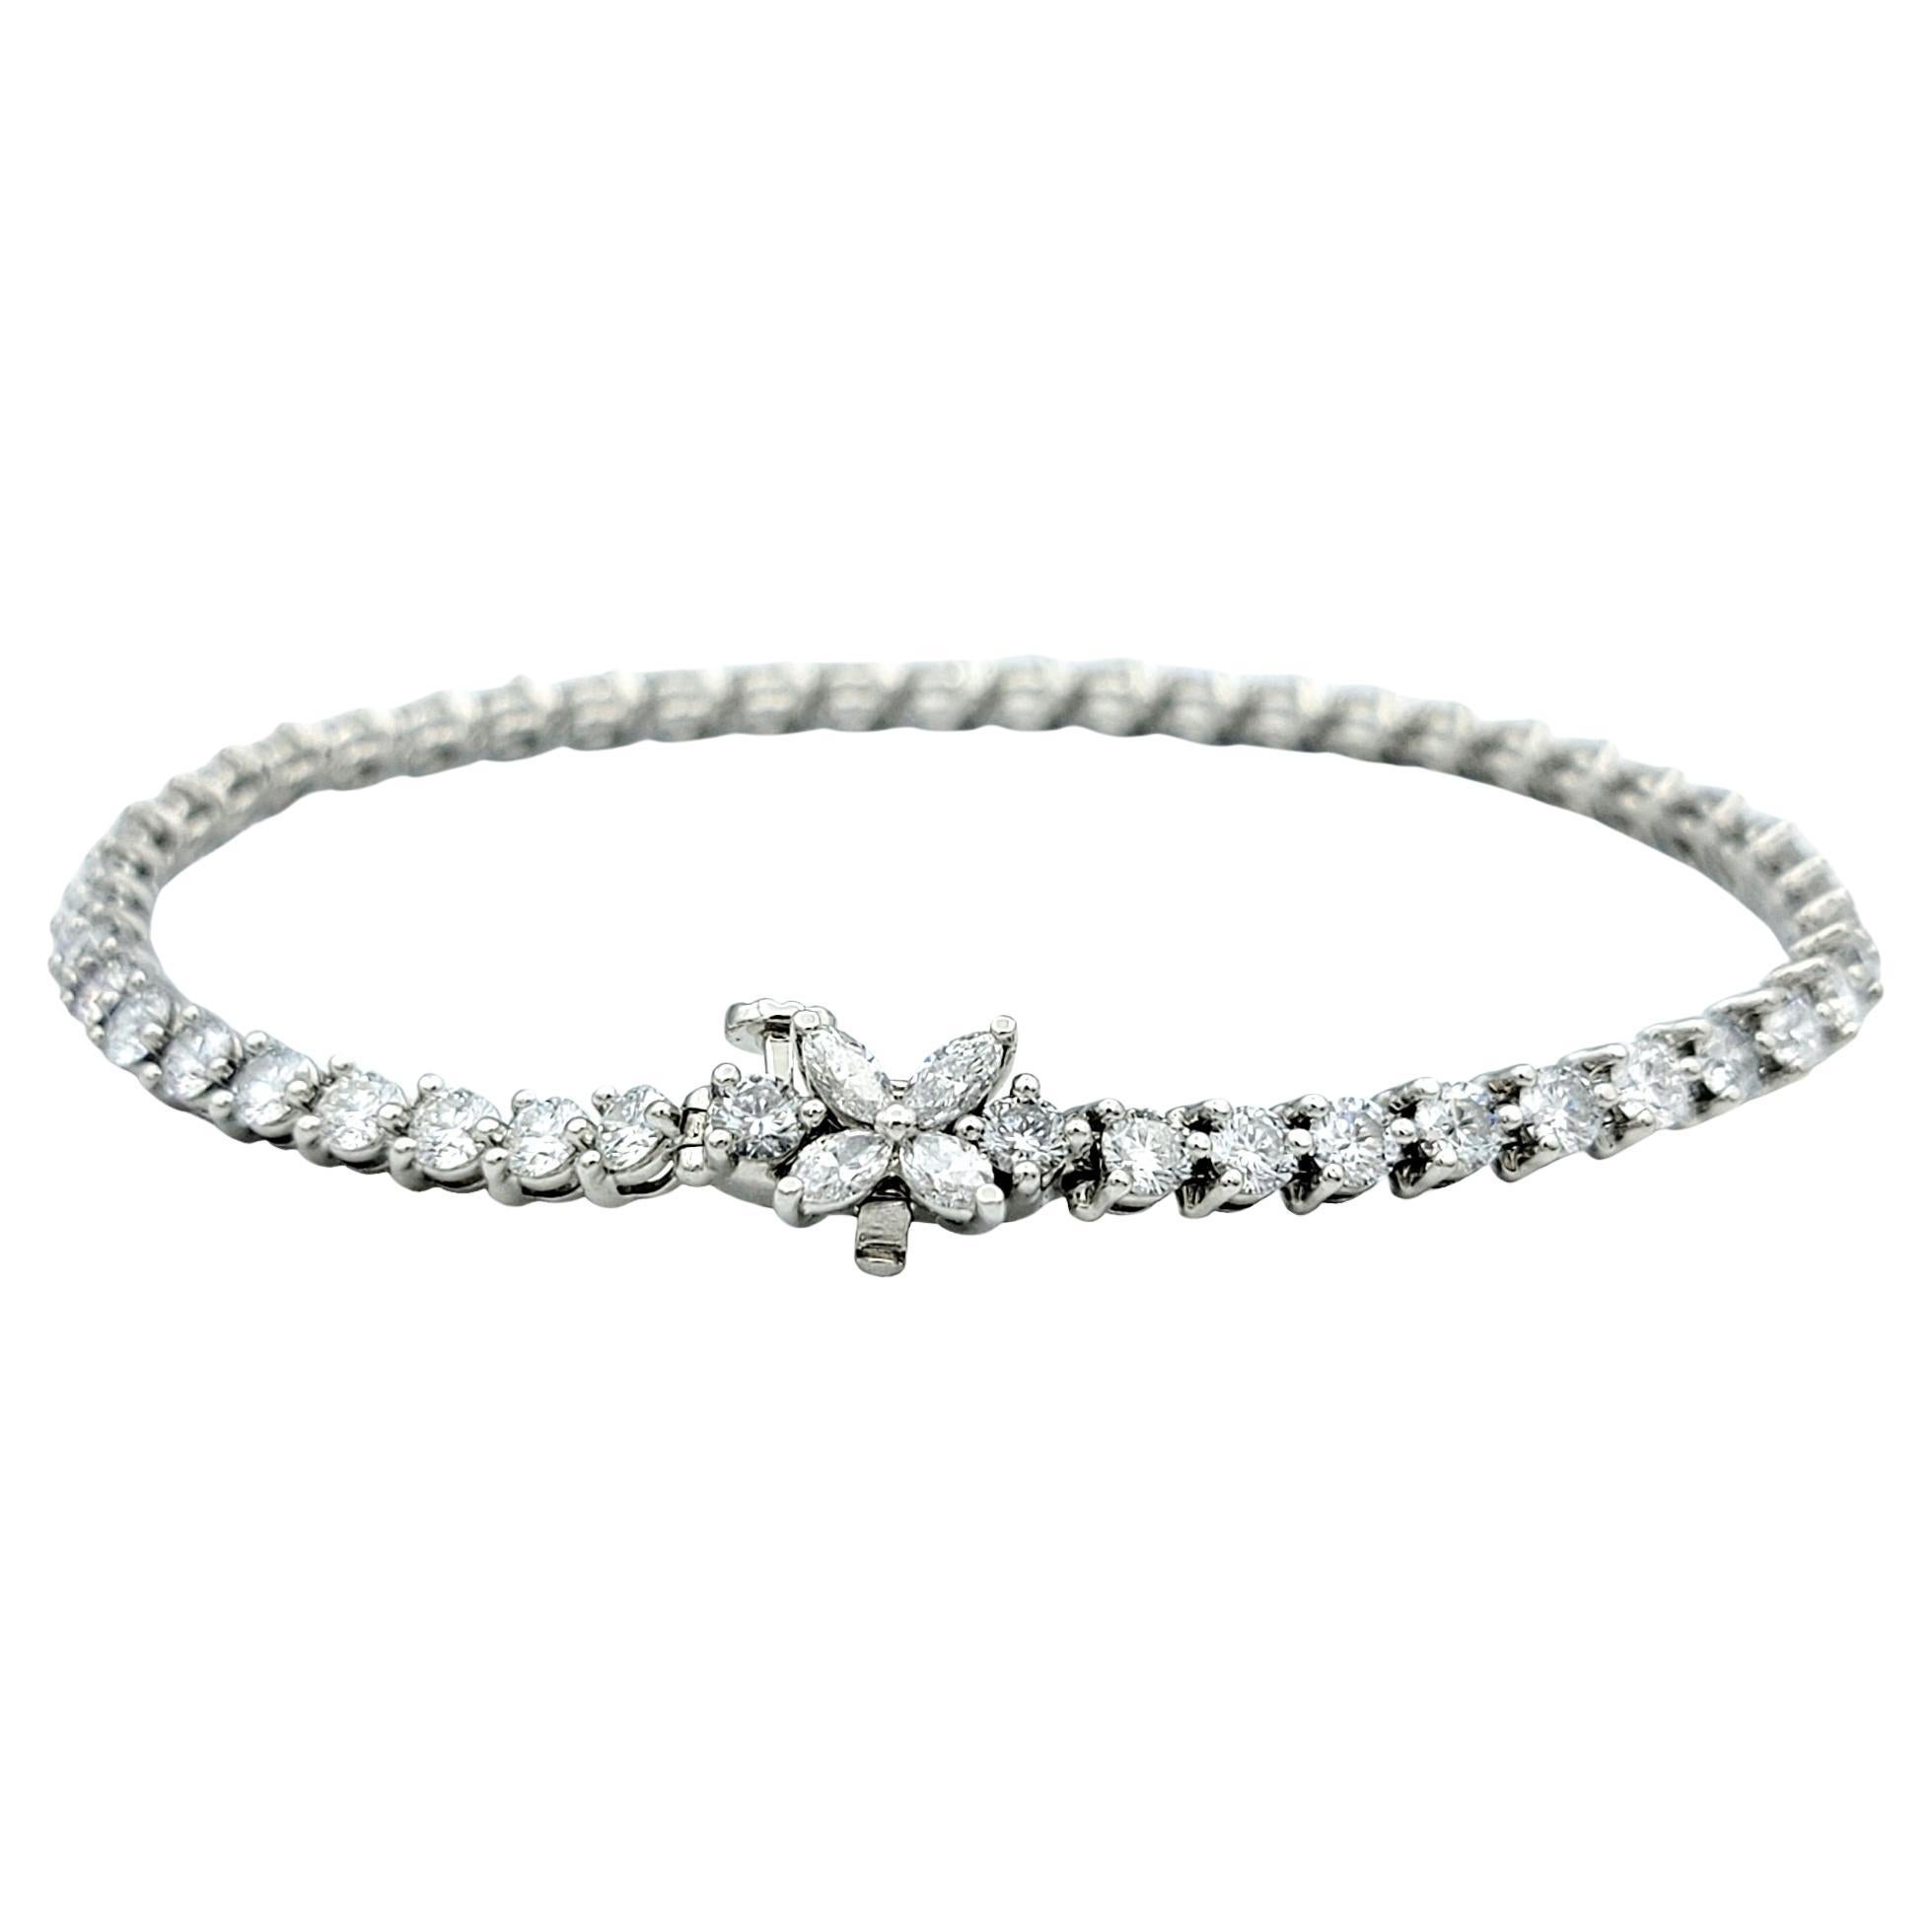 The inner circumference of this bracelet measures 6.63 inches and will comfortably fit a 6.5 inch wrist. 

This beautiful Tiffany & Co. Victoria diamond tennis bracelet is a stunning piece that exudes elegance and sophistication. Crafted with